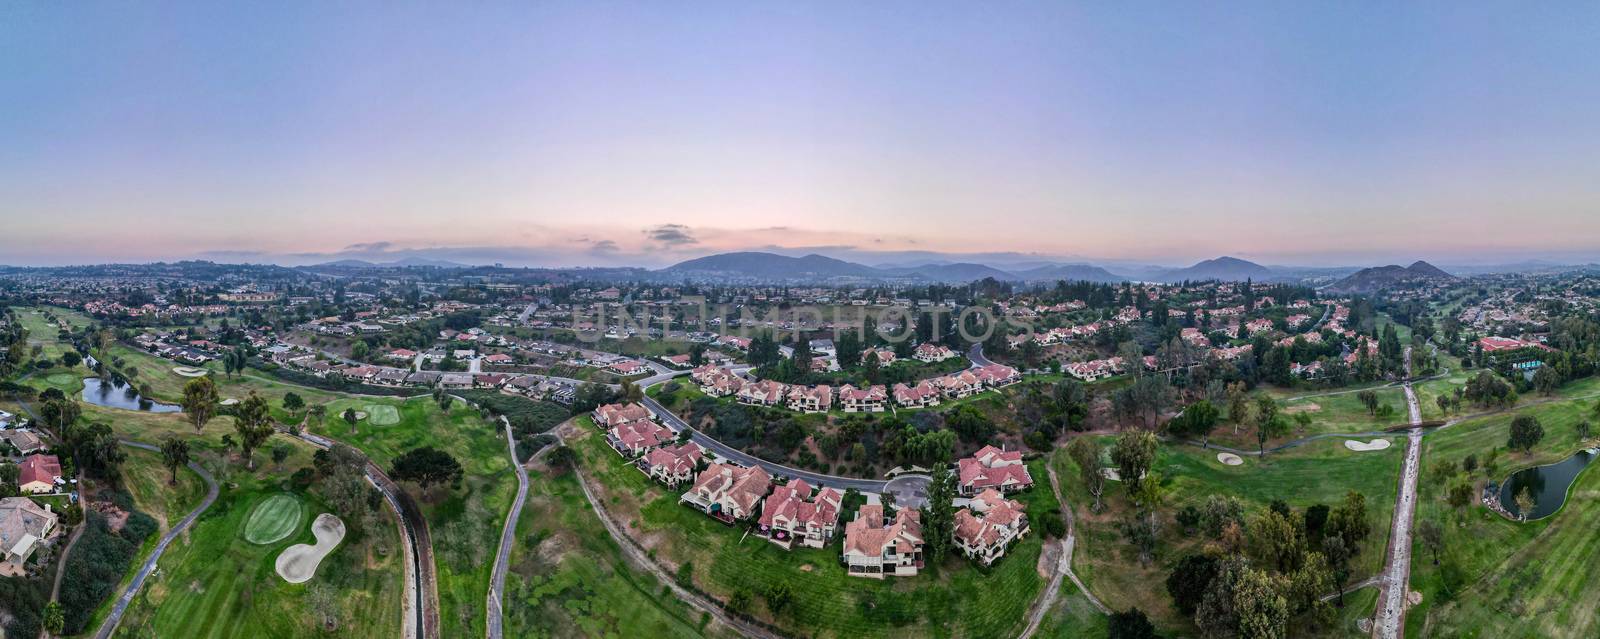 Aerial panoramic view of golf in upscale residential neighborhood during sunset, Rancho Bernardo, San Diego County, California. USA. 